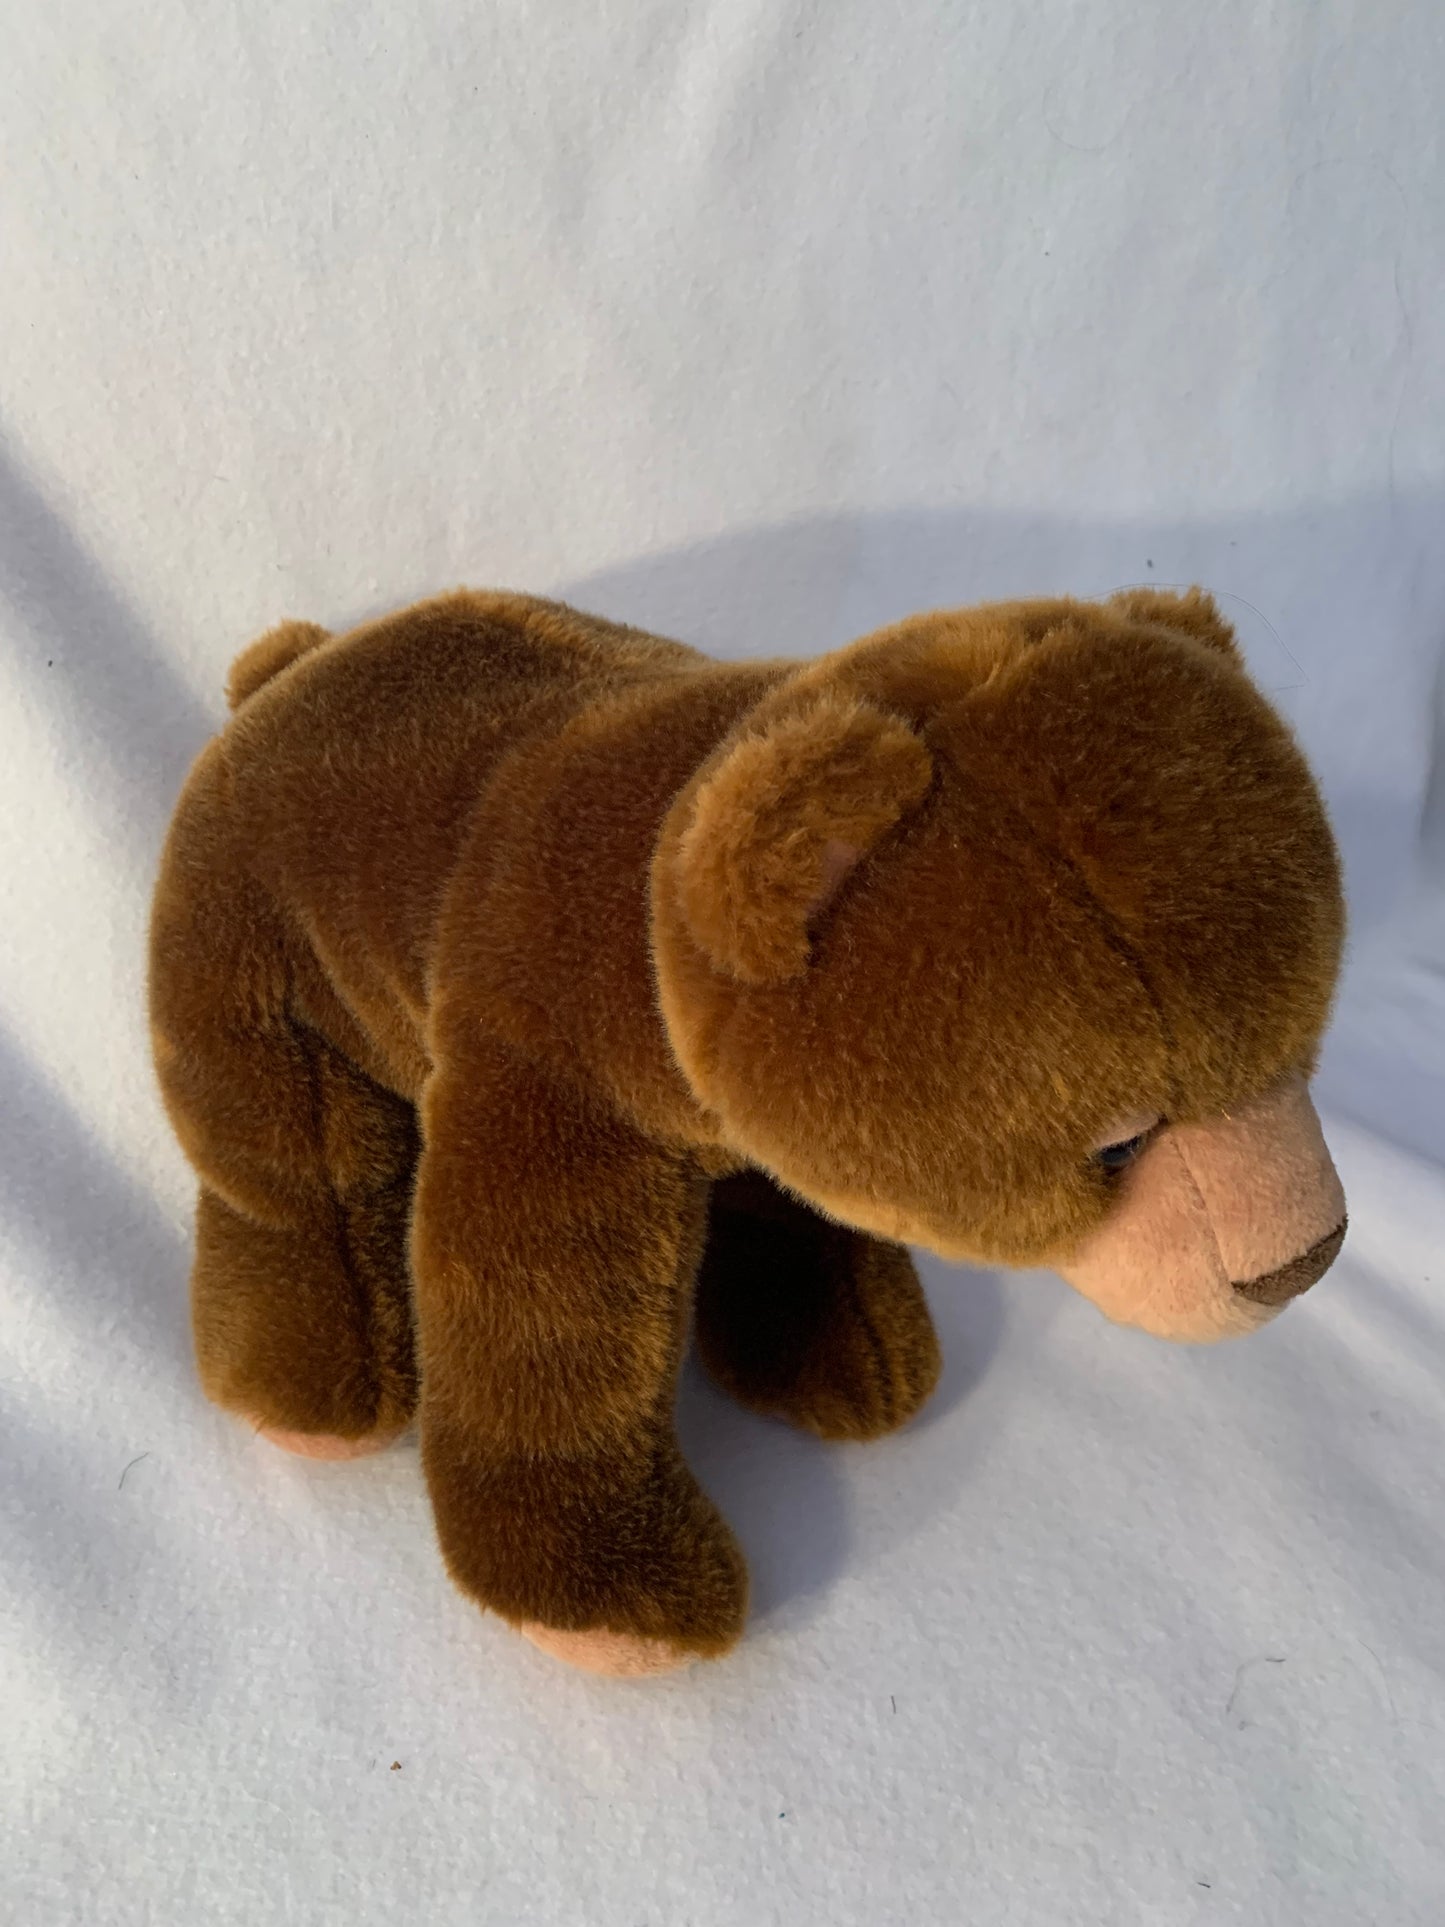 Weighted Stuffed Animal - Weighted Teddy Bear or Monkey with 4 lbs, washable plush buddy, brown bear